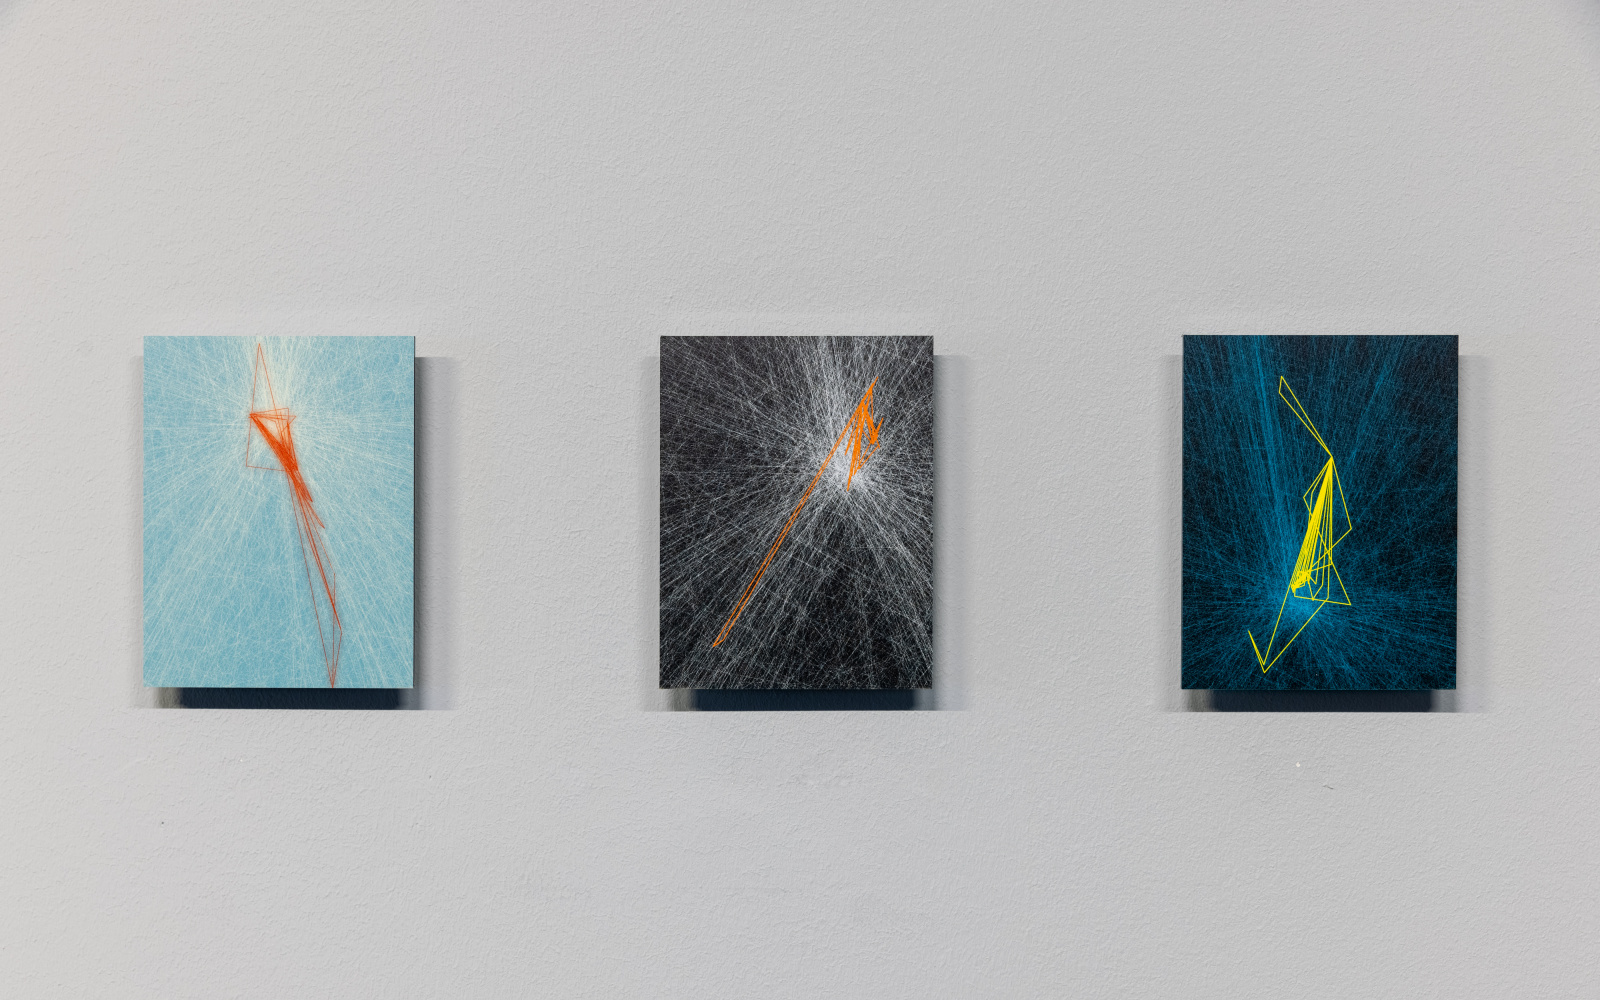 Three smaller canvases hang next to each other. They each show fine lines of a net. In Der Mitteist stands out in each case a thicker, colored, geometric-looking line shape.